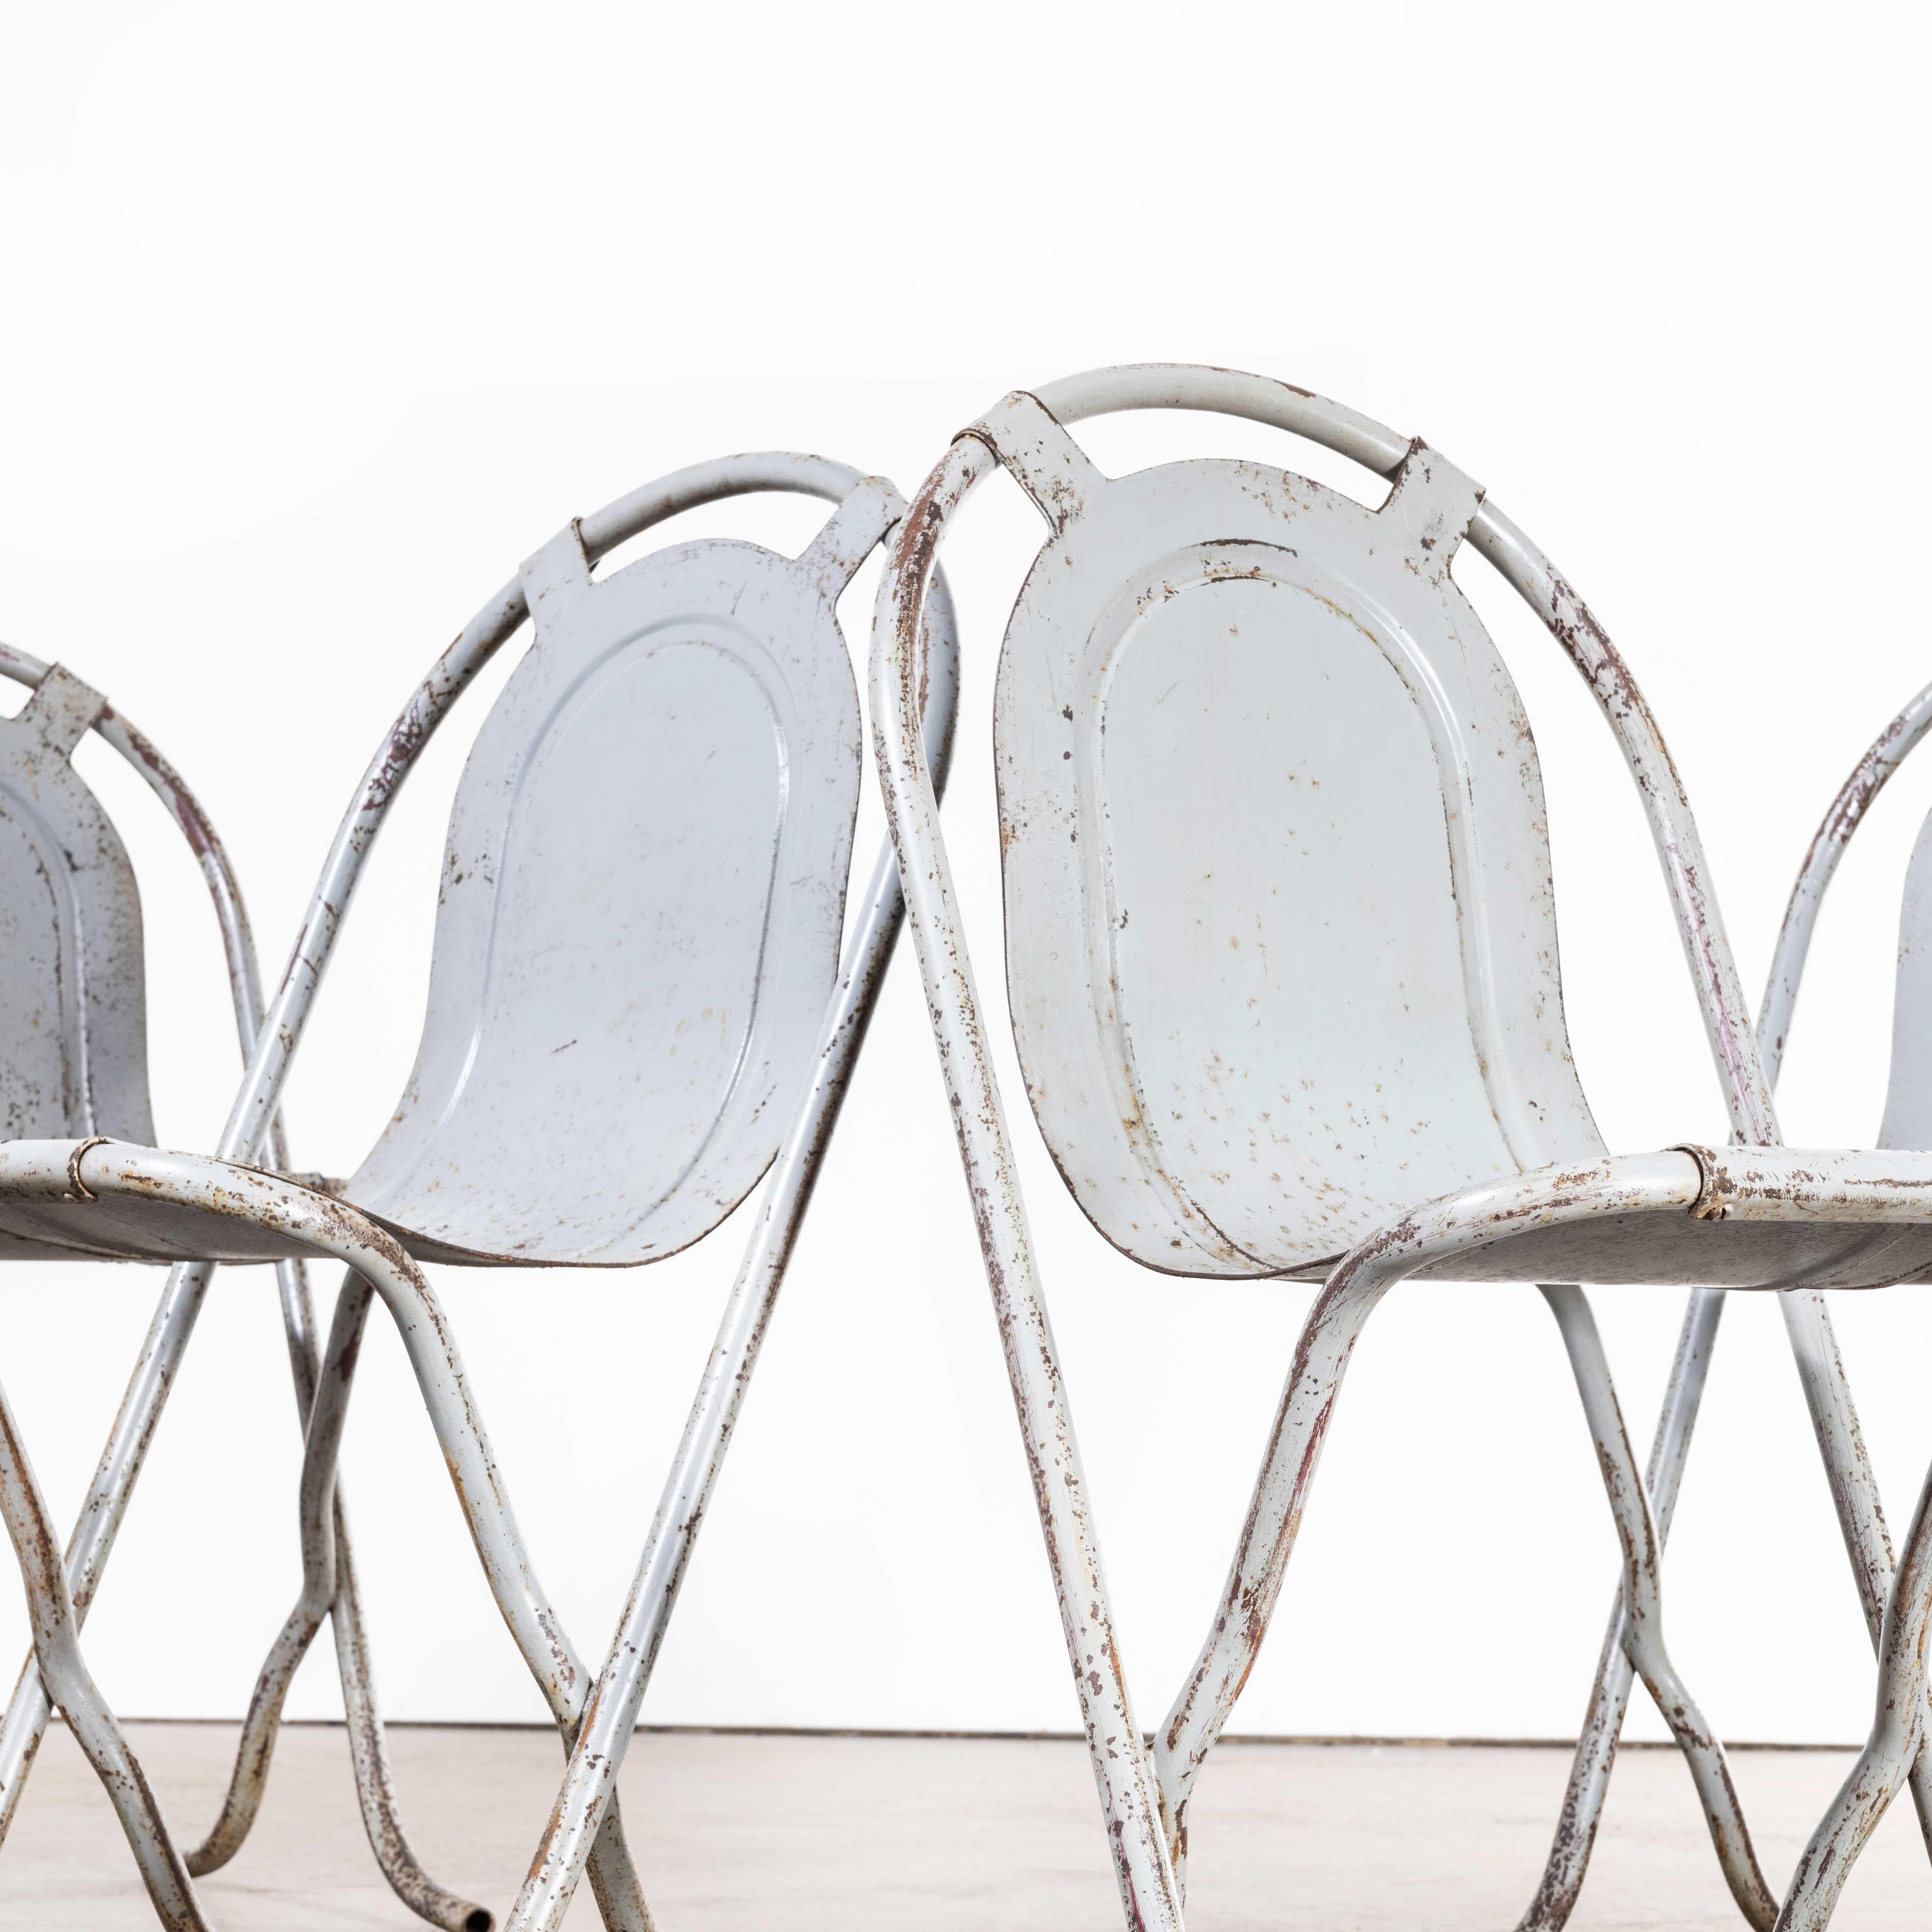 Stainless Steel 1940s Original British Stak a Bye Chairs, Grey, Set of Four For Sale